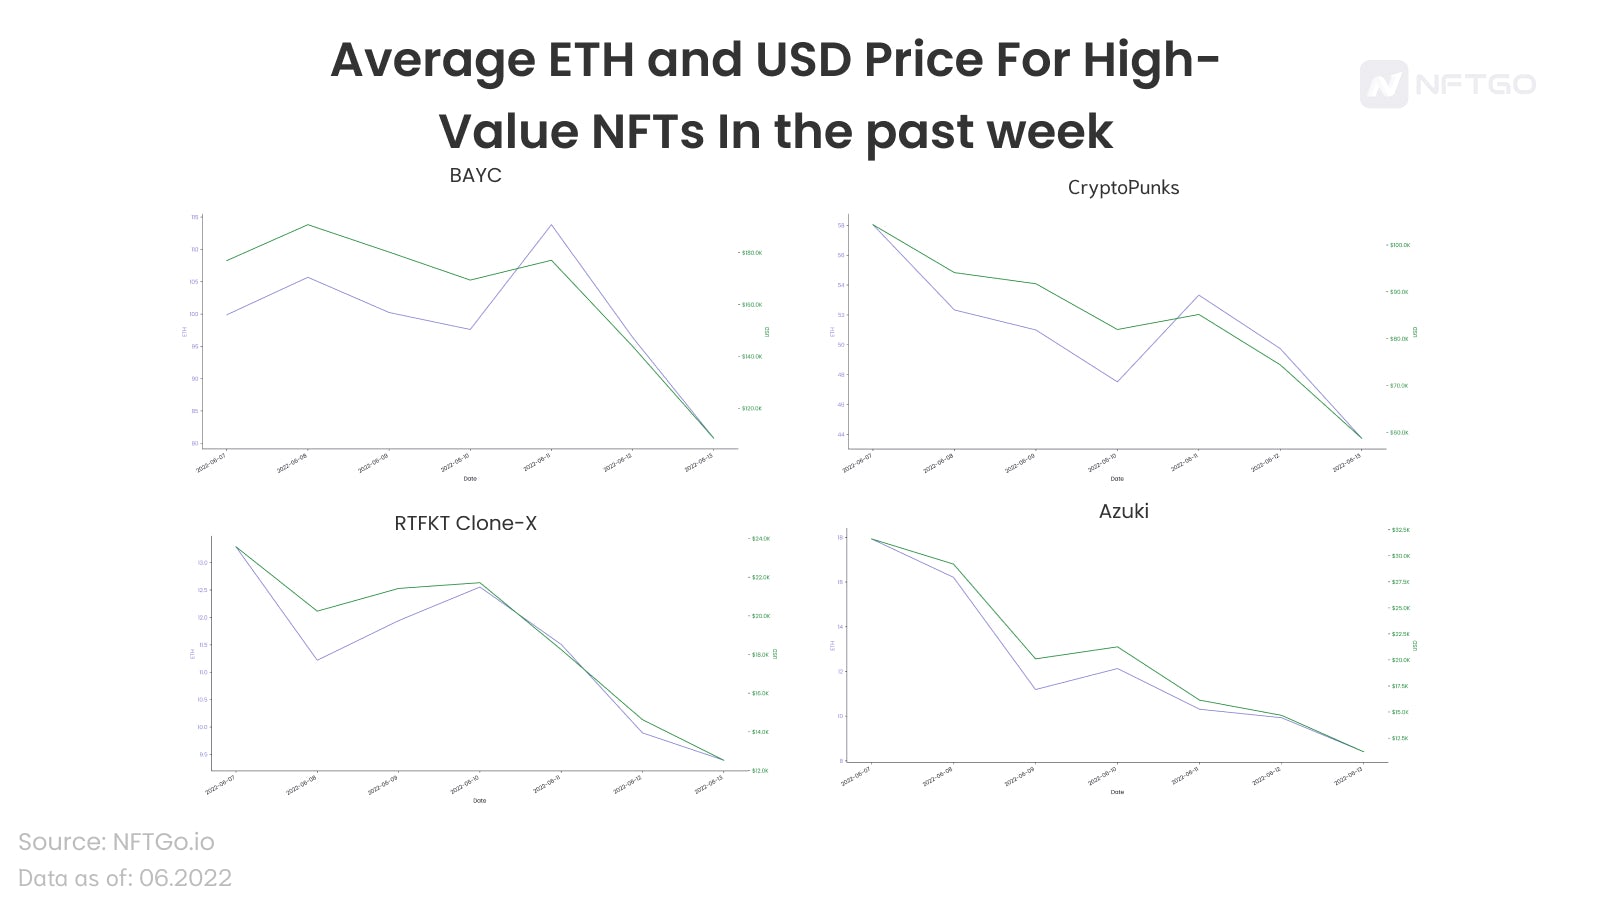 Average ETH and USD Price For High-Value NFTs In the Past Week (Source: NFTGo.io)